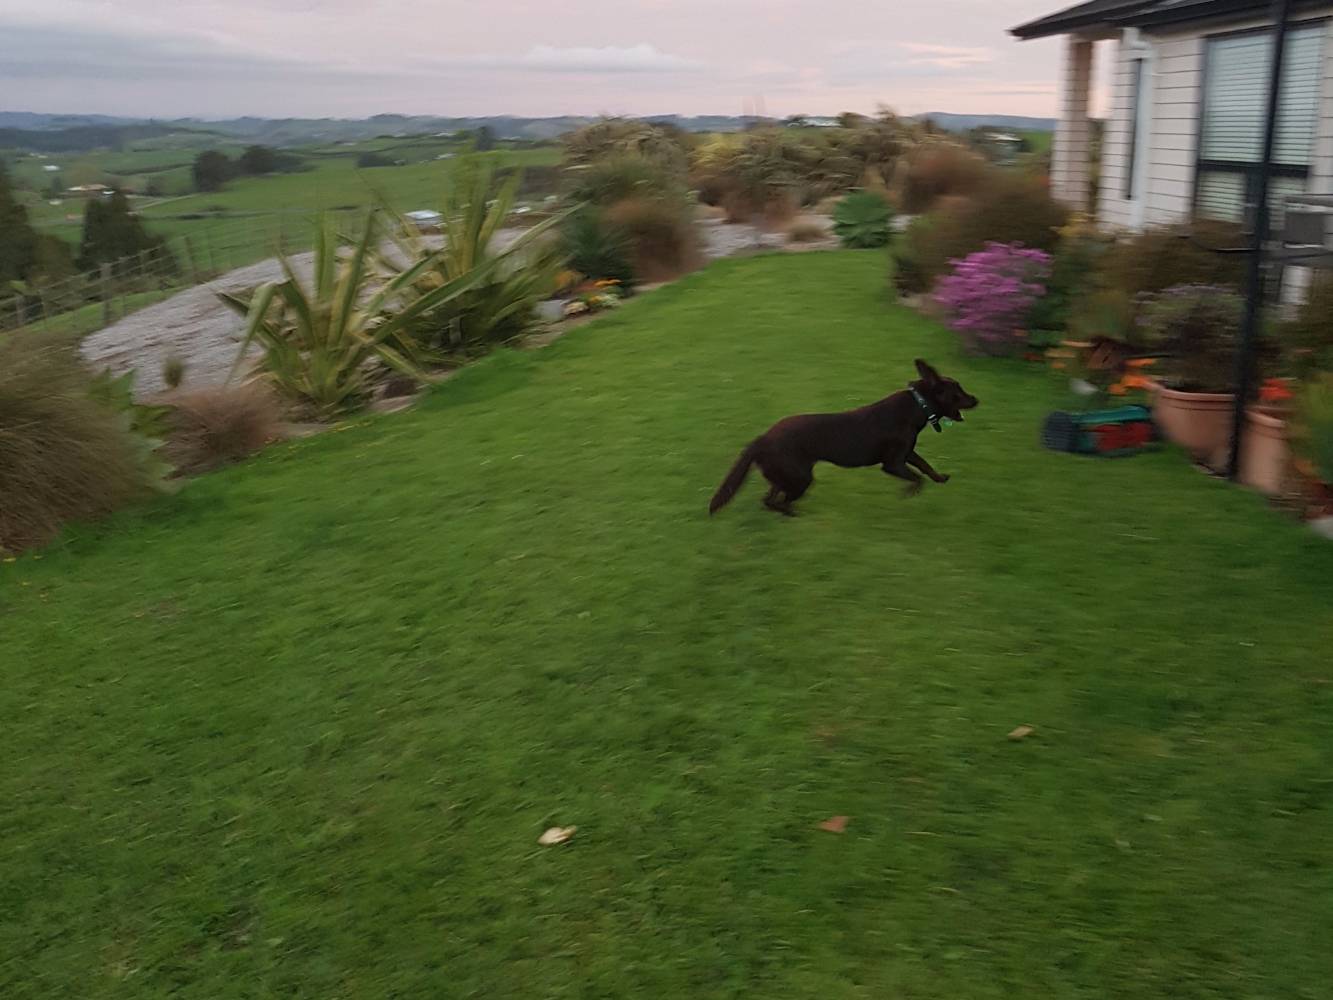 Our Kelpie running here on the property